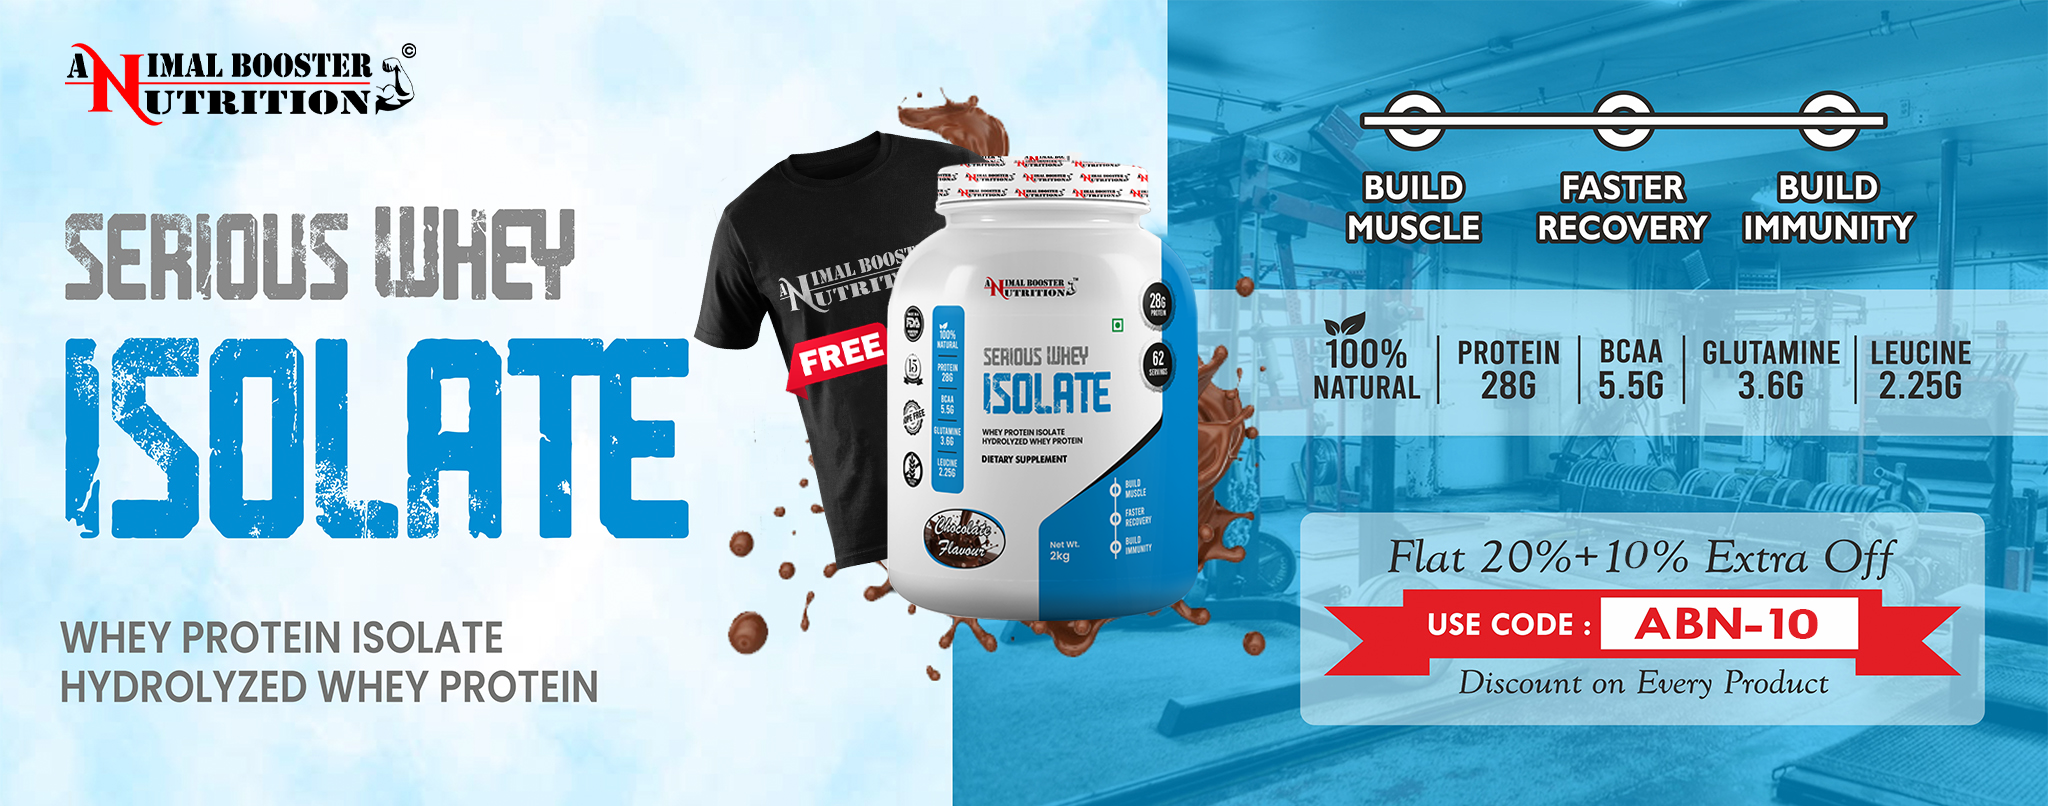 Serious Whey Isolate